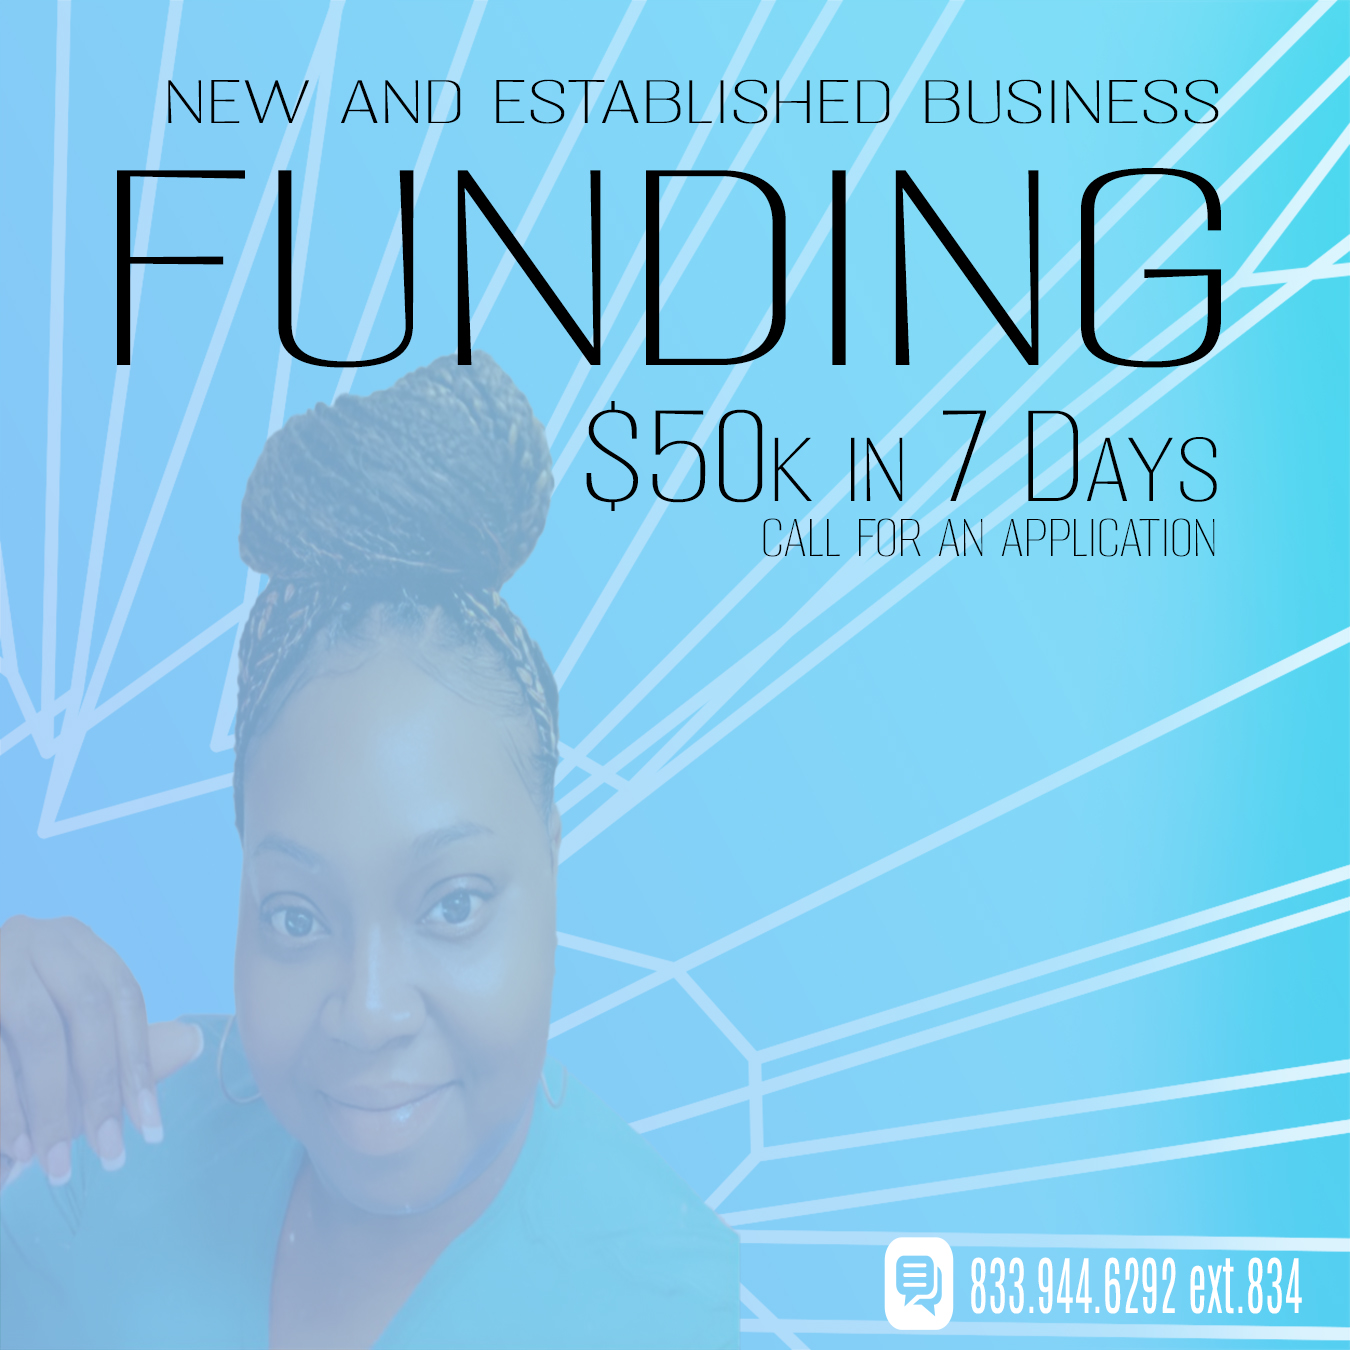 Business Funding from $10k through Nore Loans